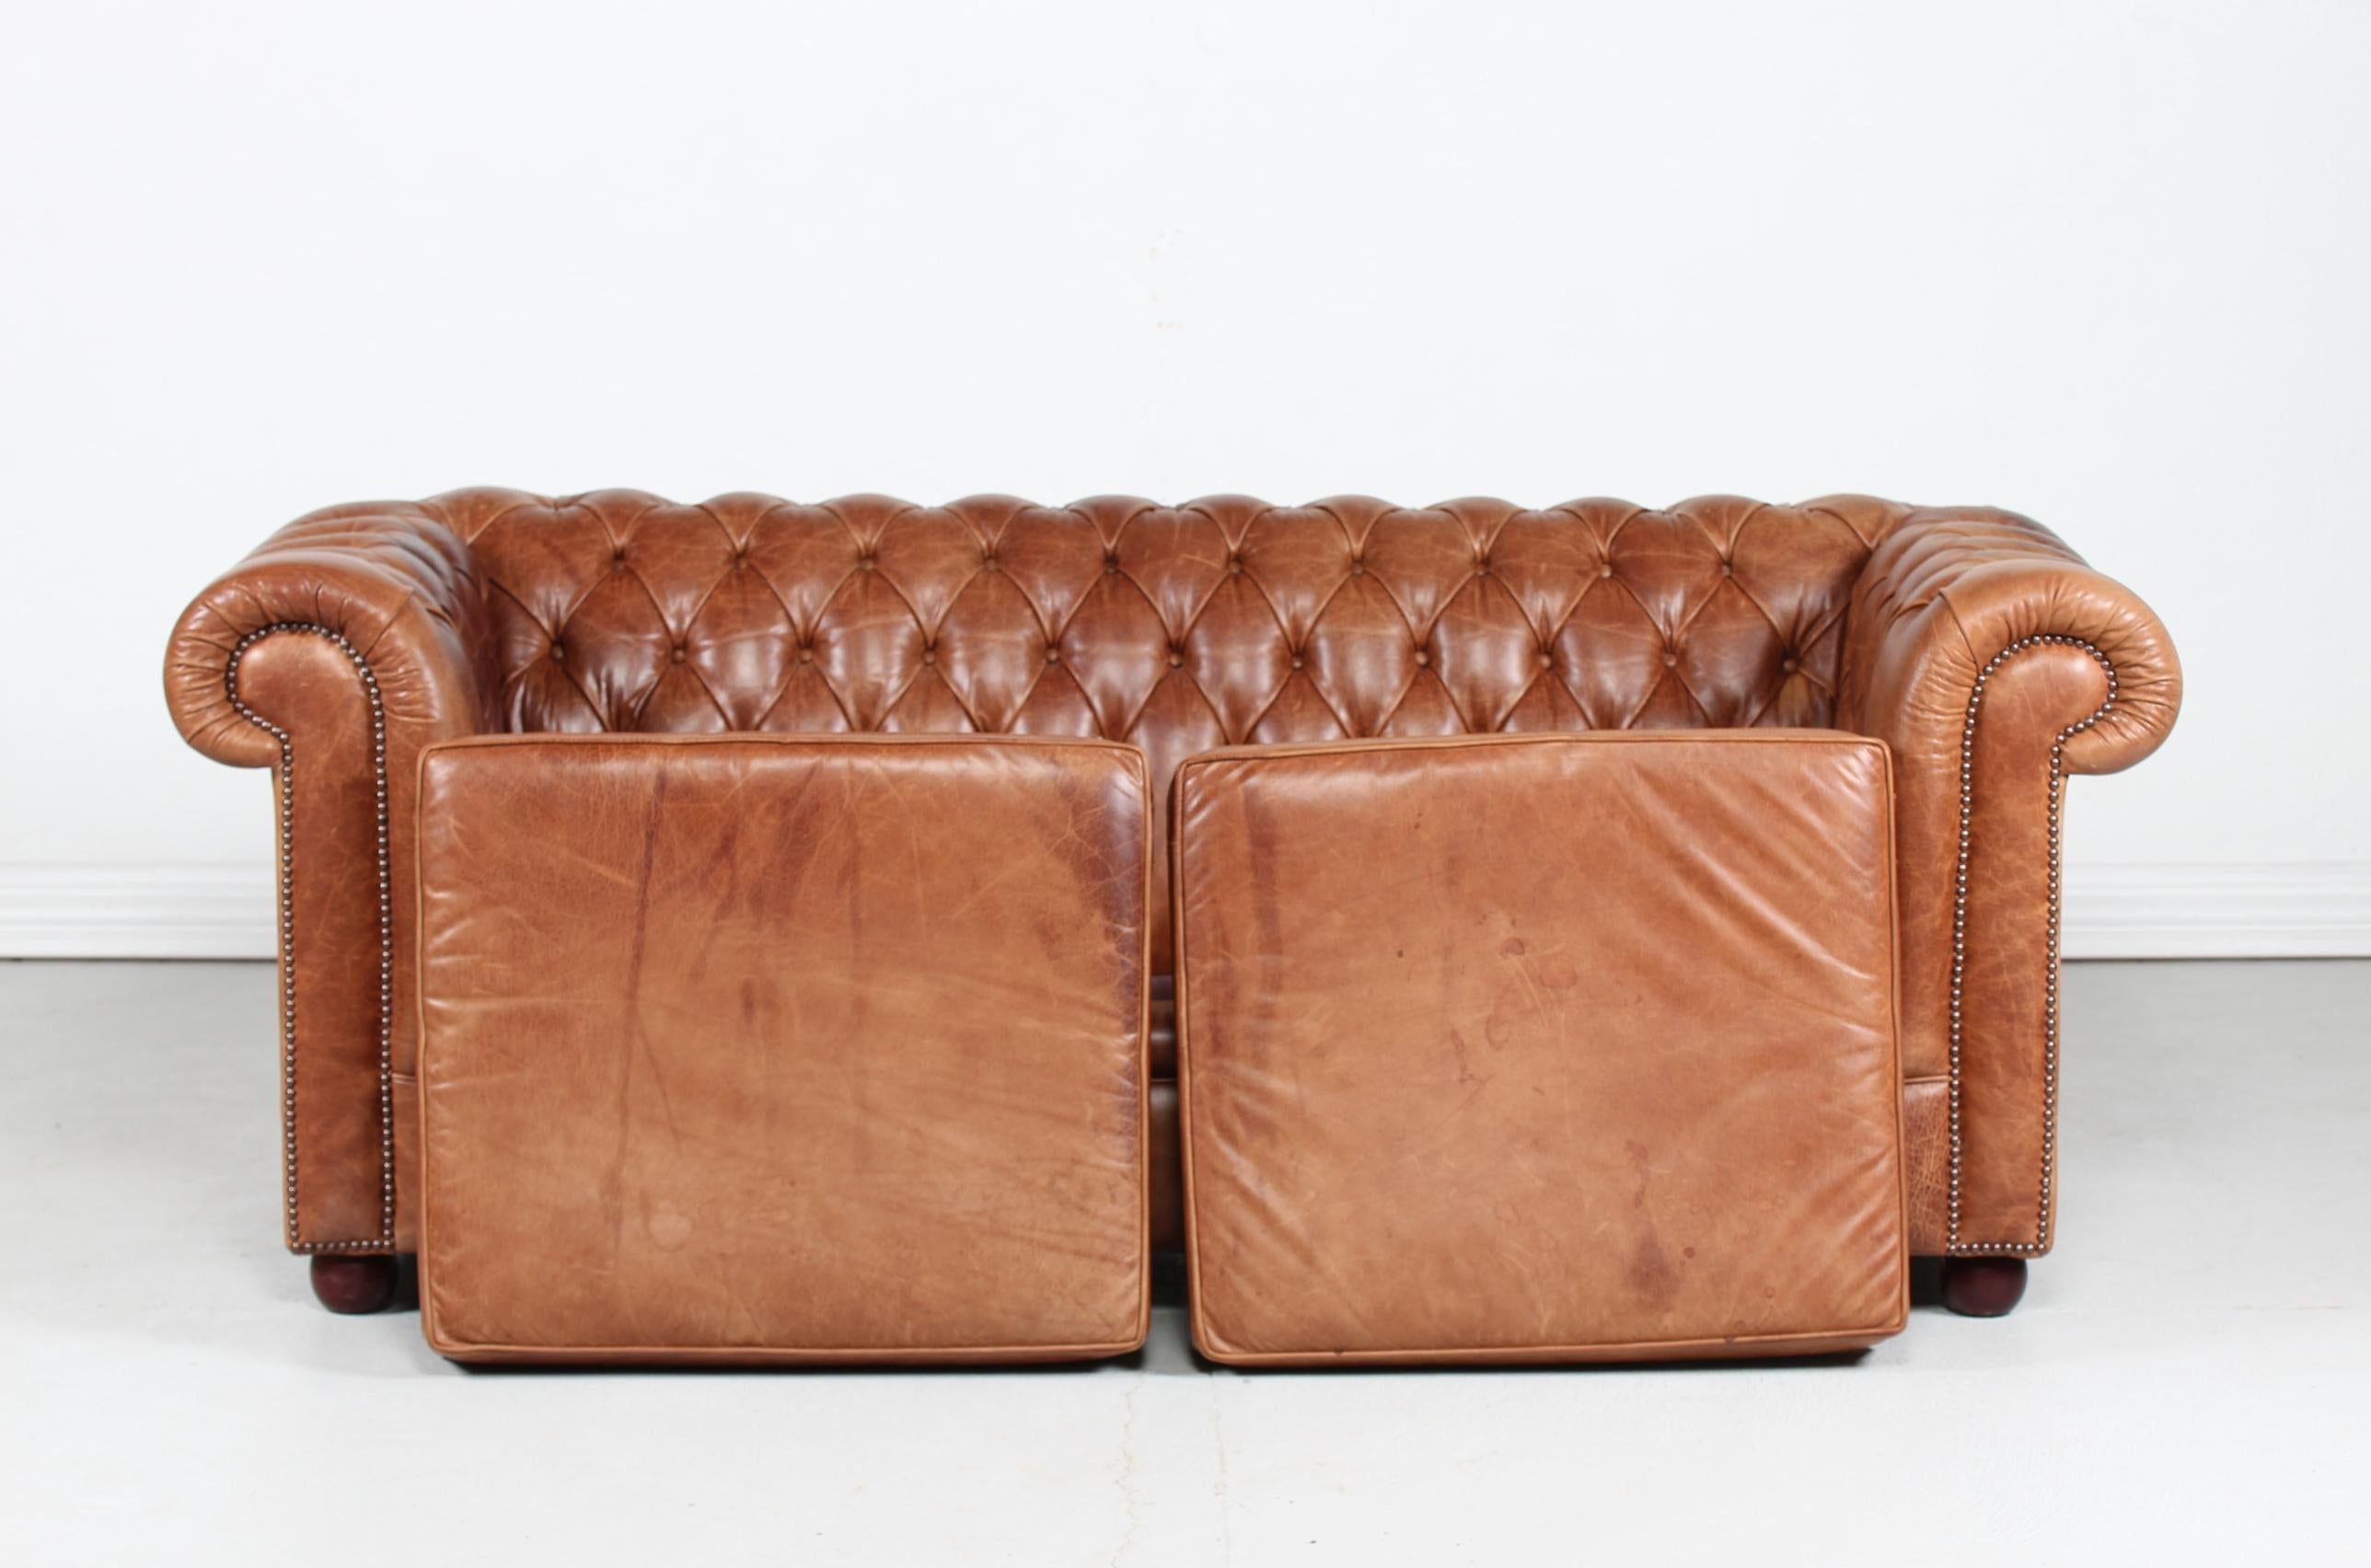 English Vintage Chesterfield Sofa Cognac Leather Mounted with Numerous Buttons, 1970s